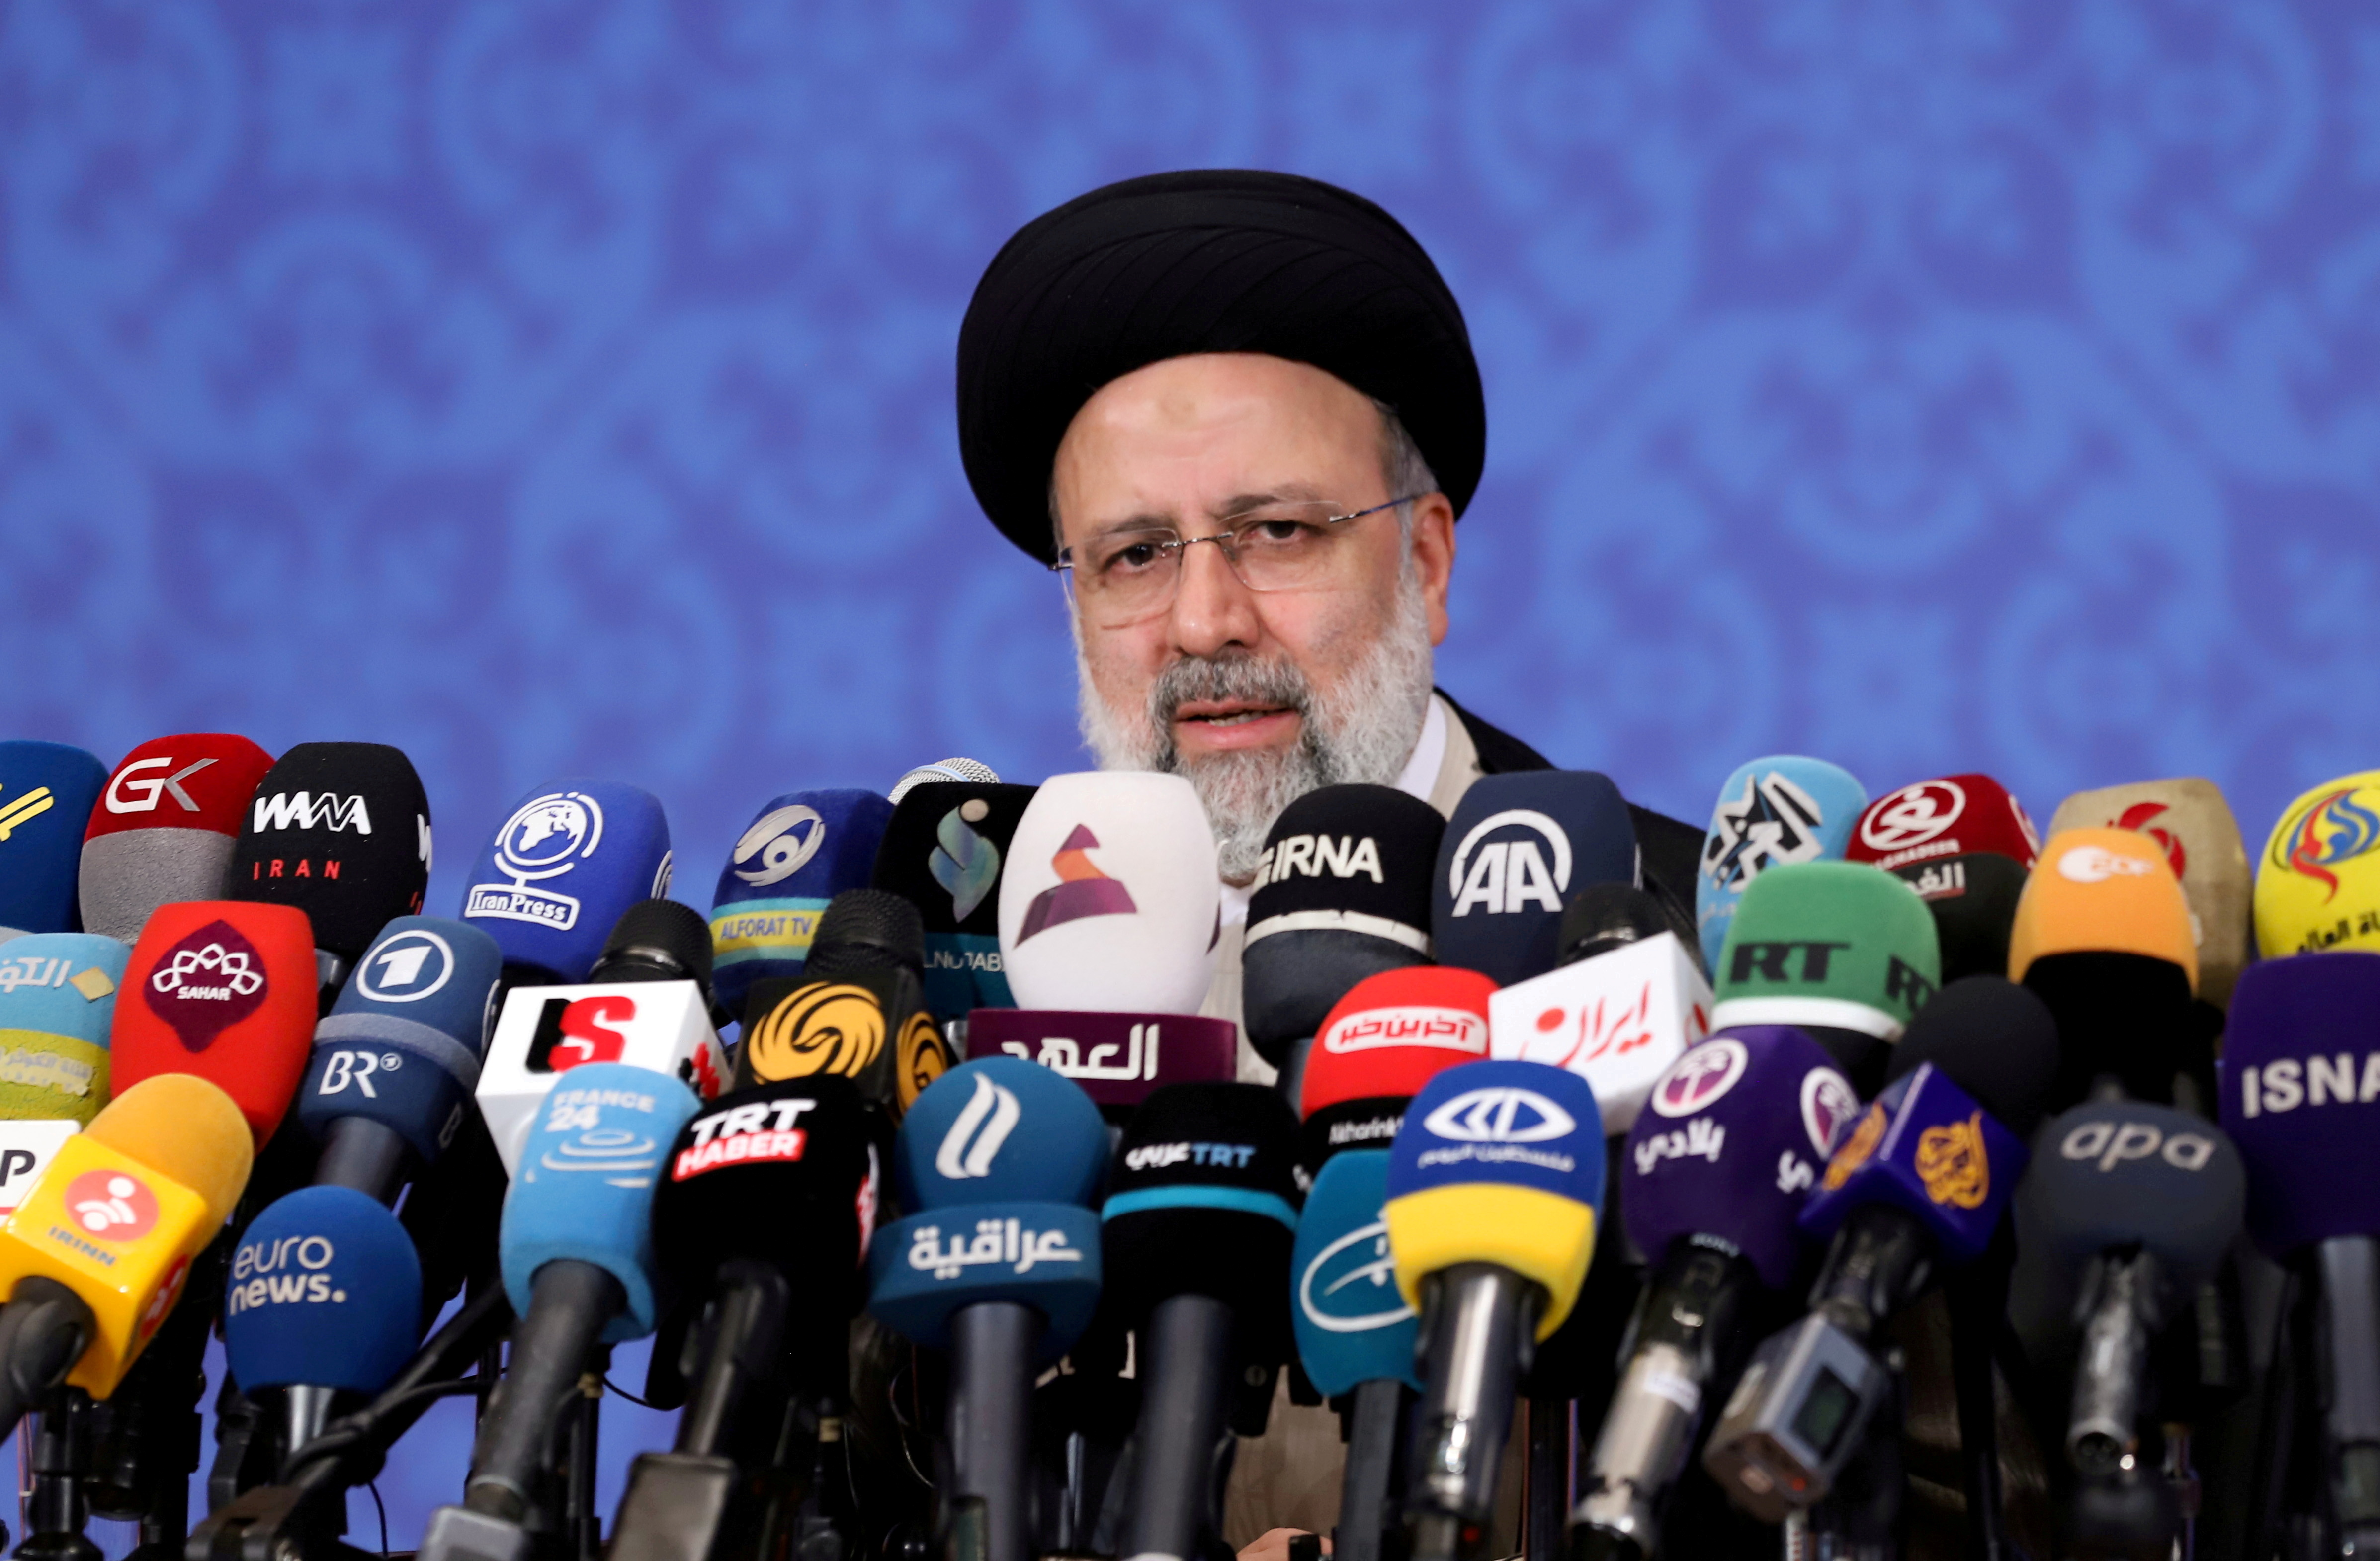 Iran's Ebrahim Raisi speaks during a news conference in Tehran